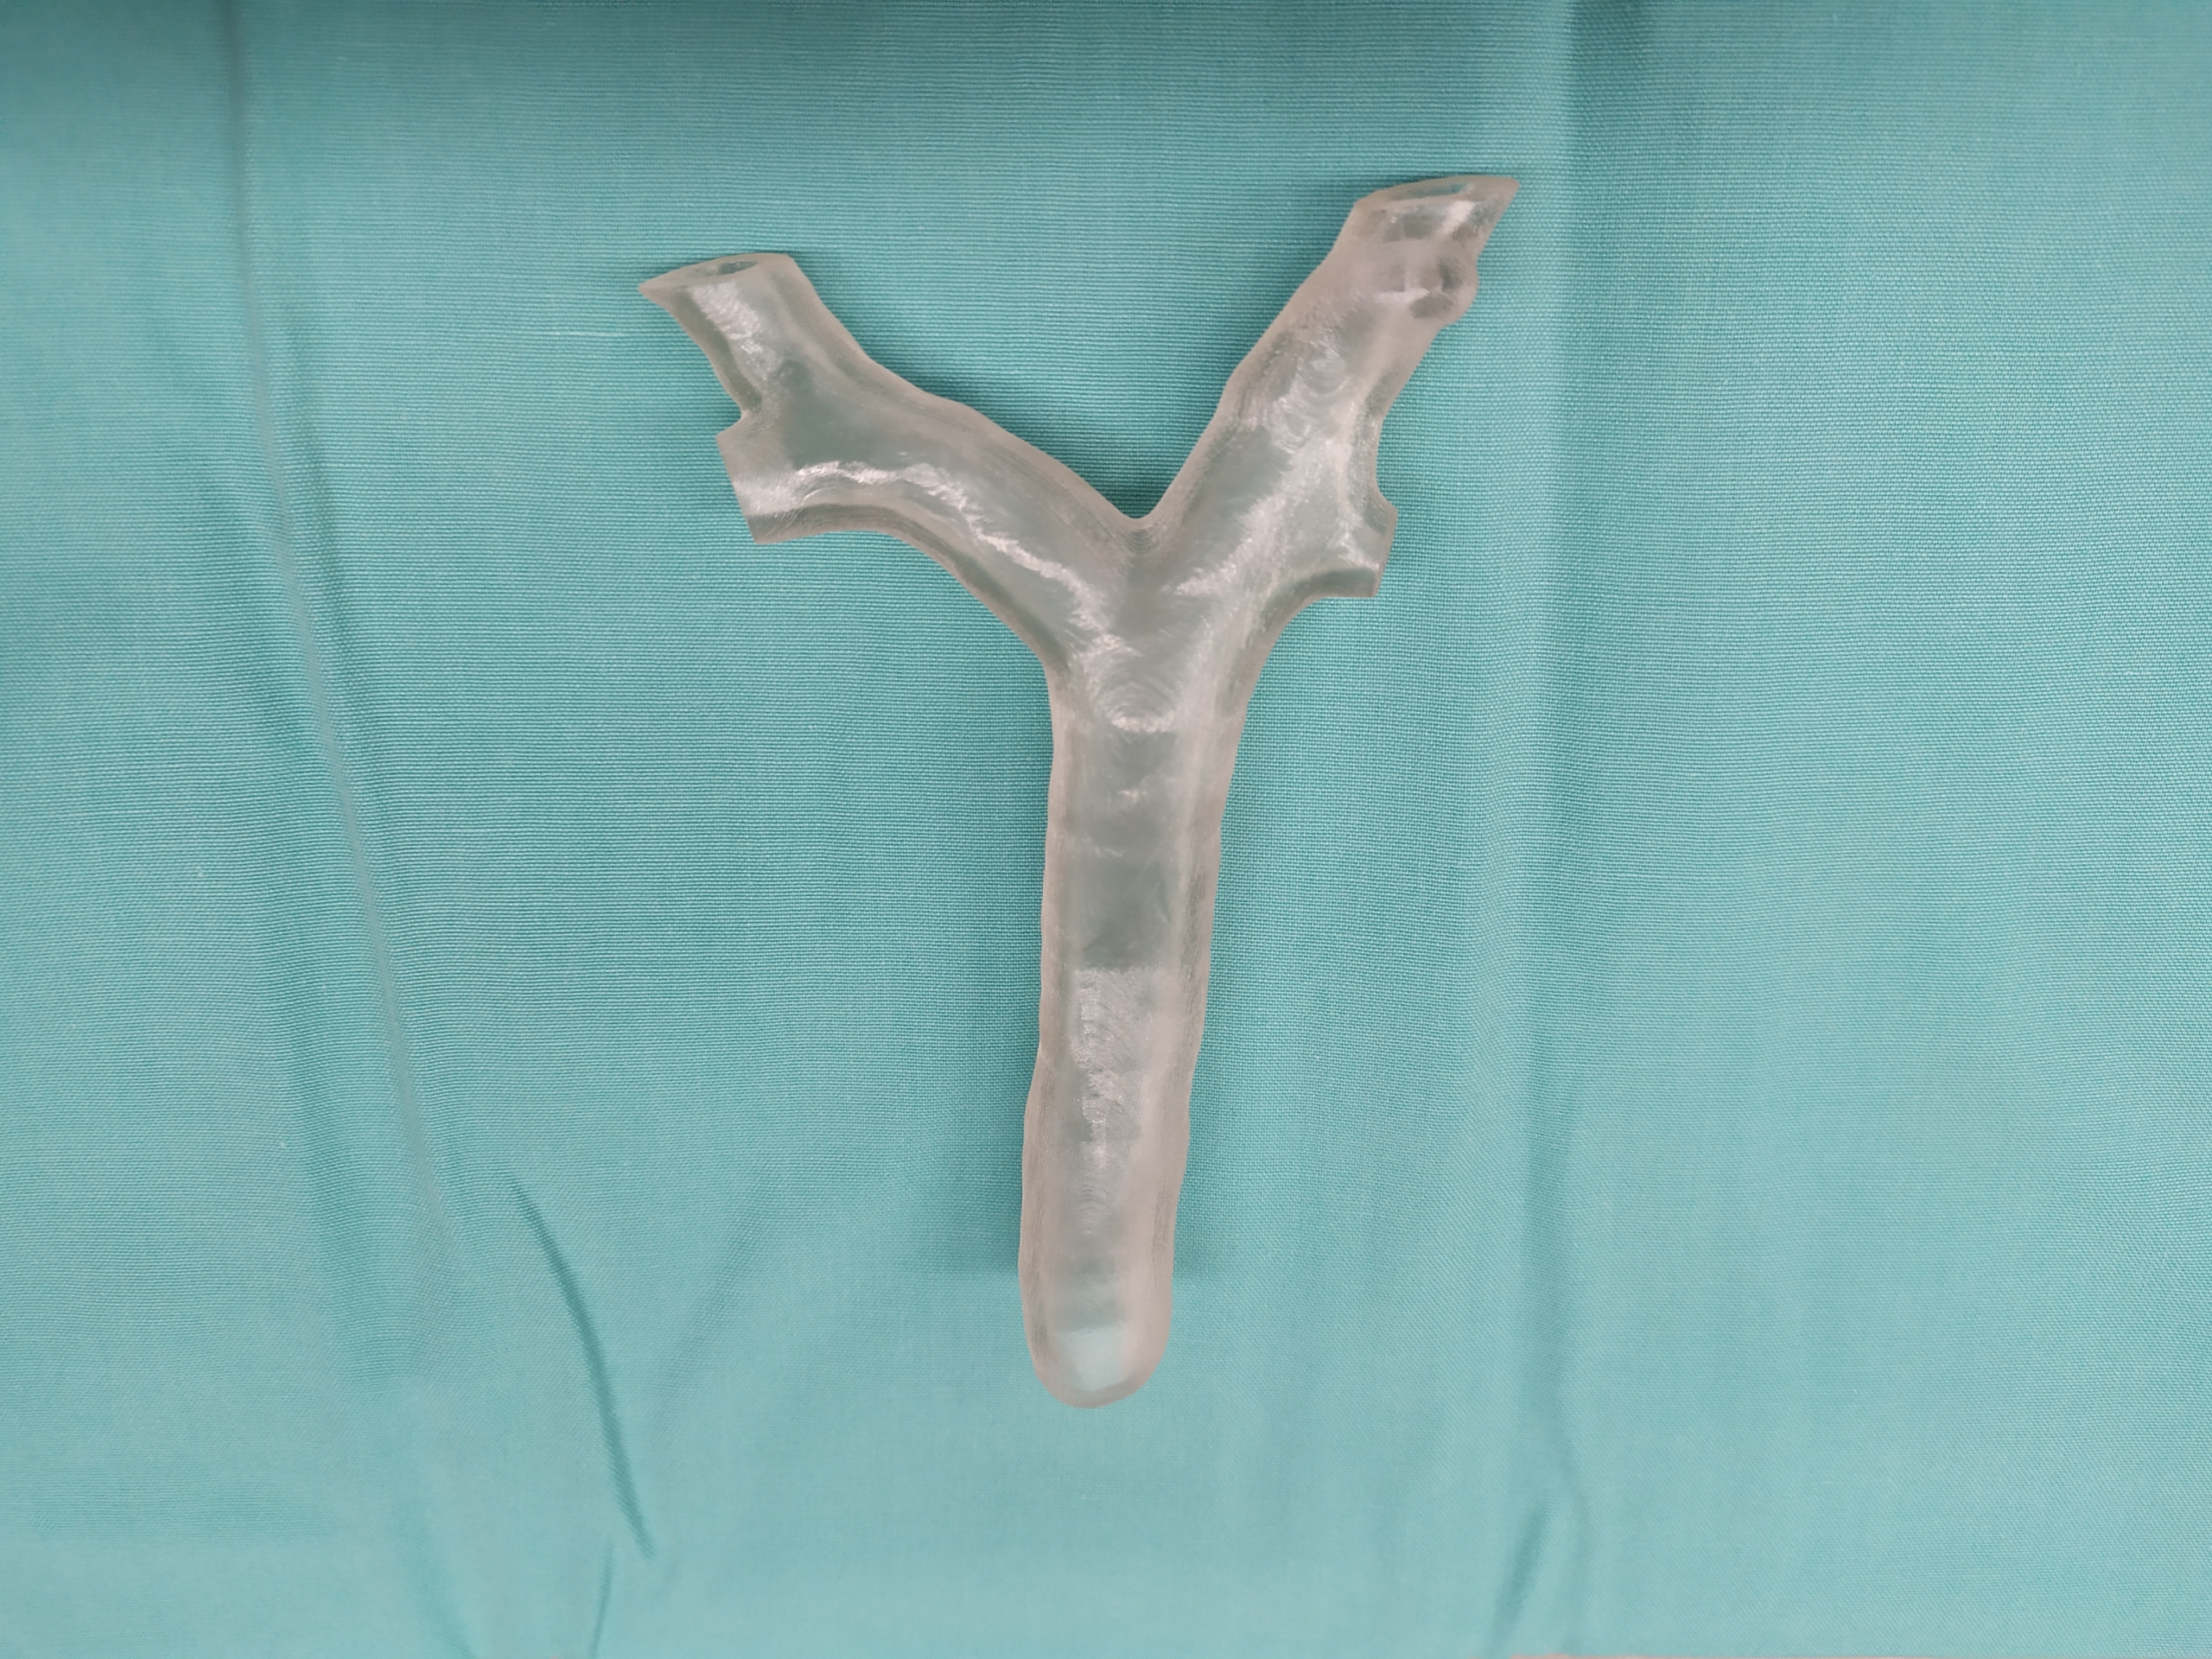 The 3D printed airway model. Photo via Dr Ruth Shaylor.